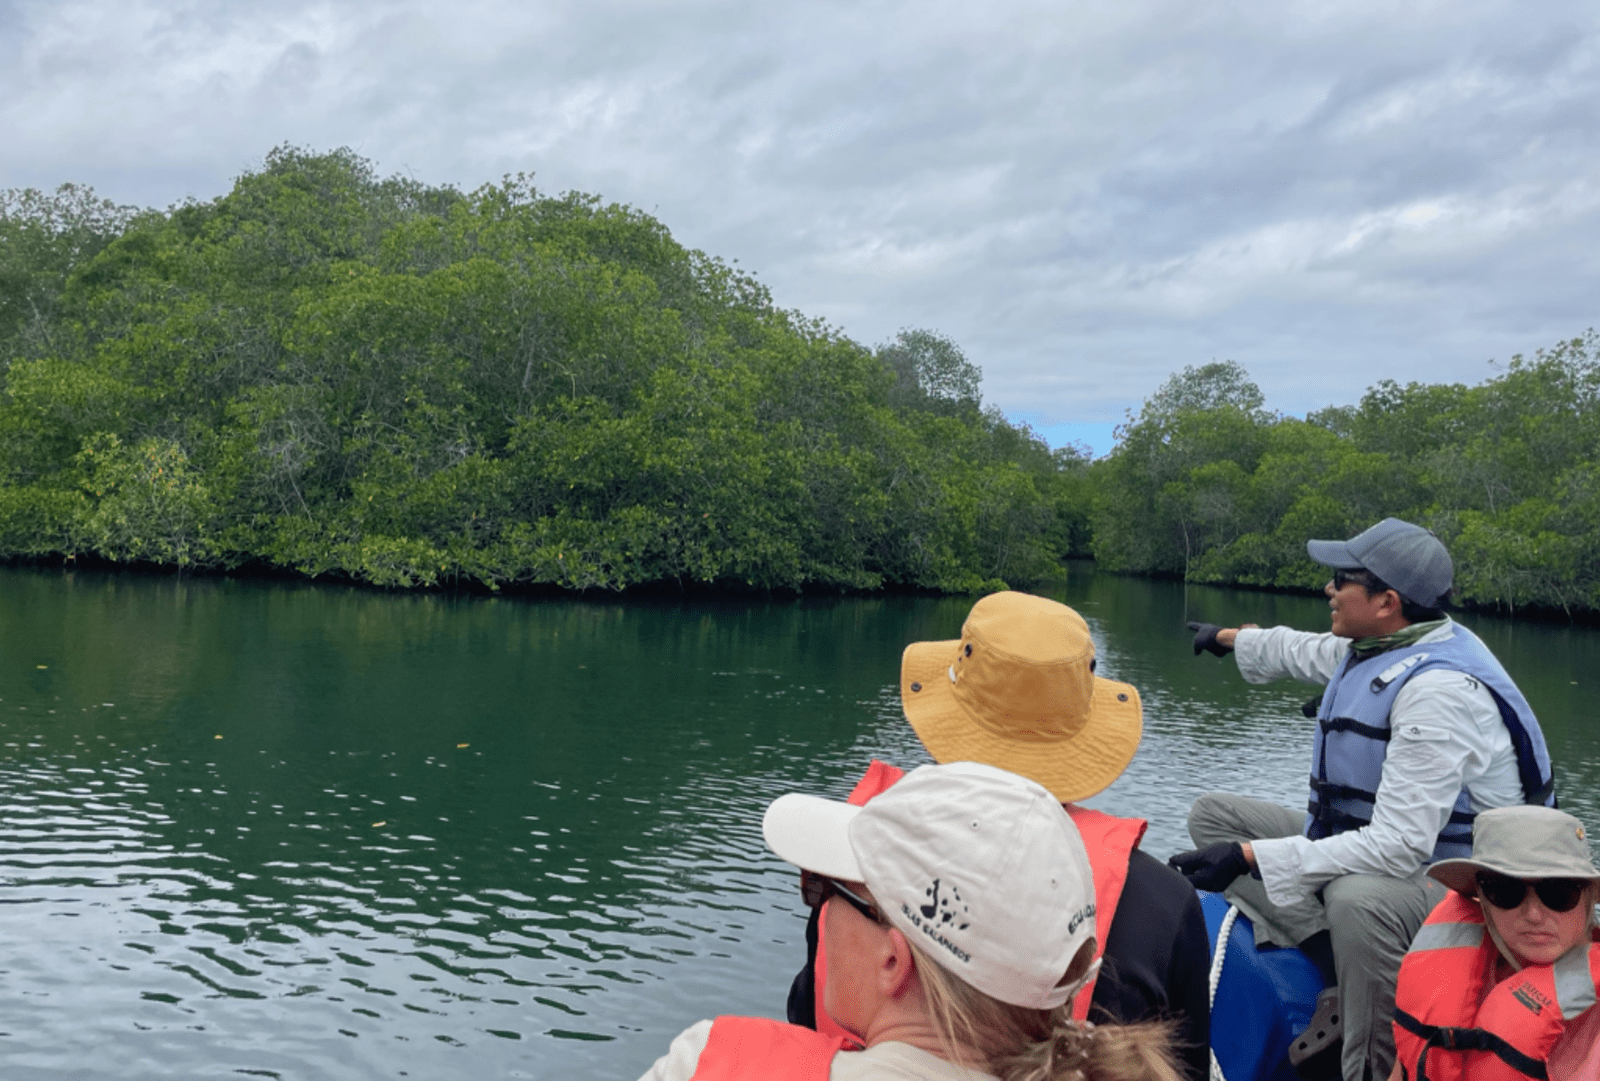 A group tour aboard a boat off the Galapagos Islands.